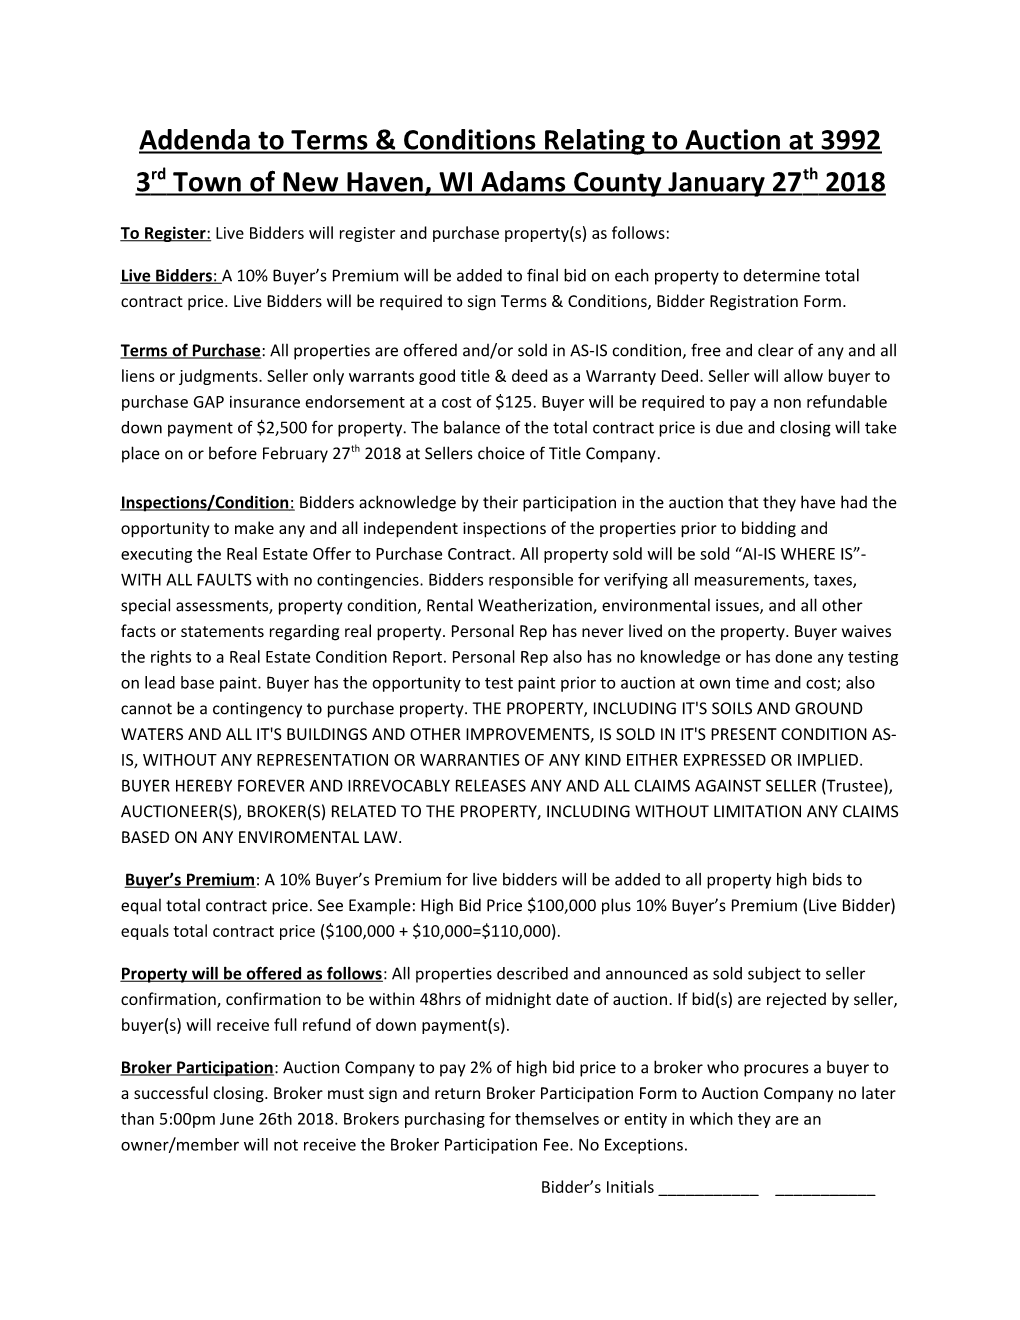 Addenda to Terms & Conditions Relating to Auction at 39923Rd Town of New Haven, WI Adams